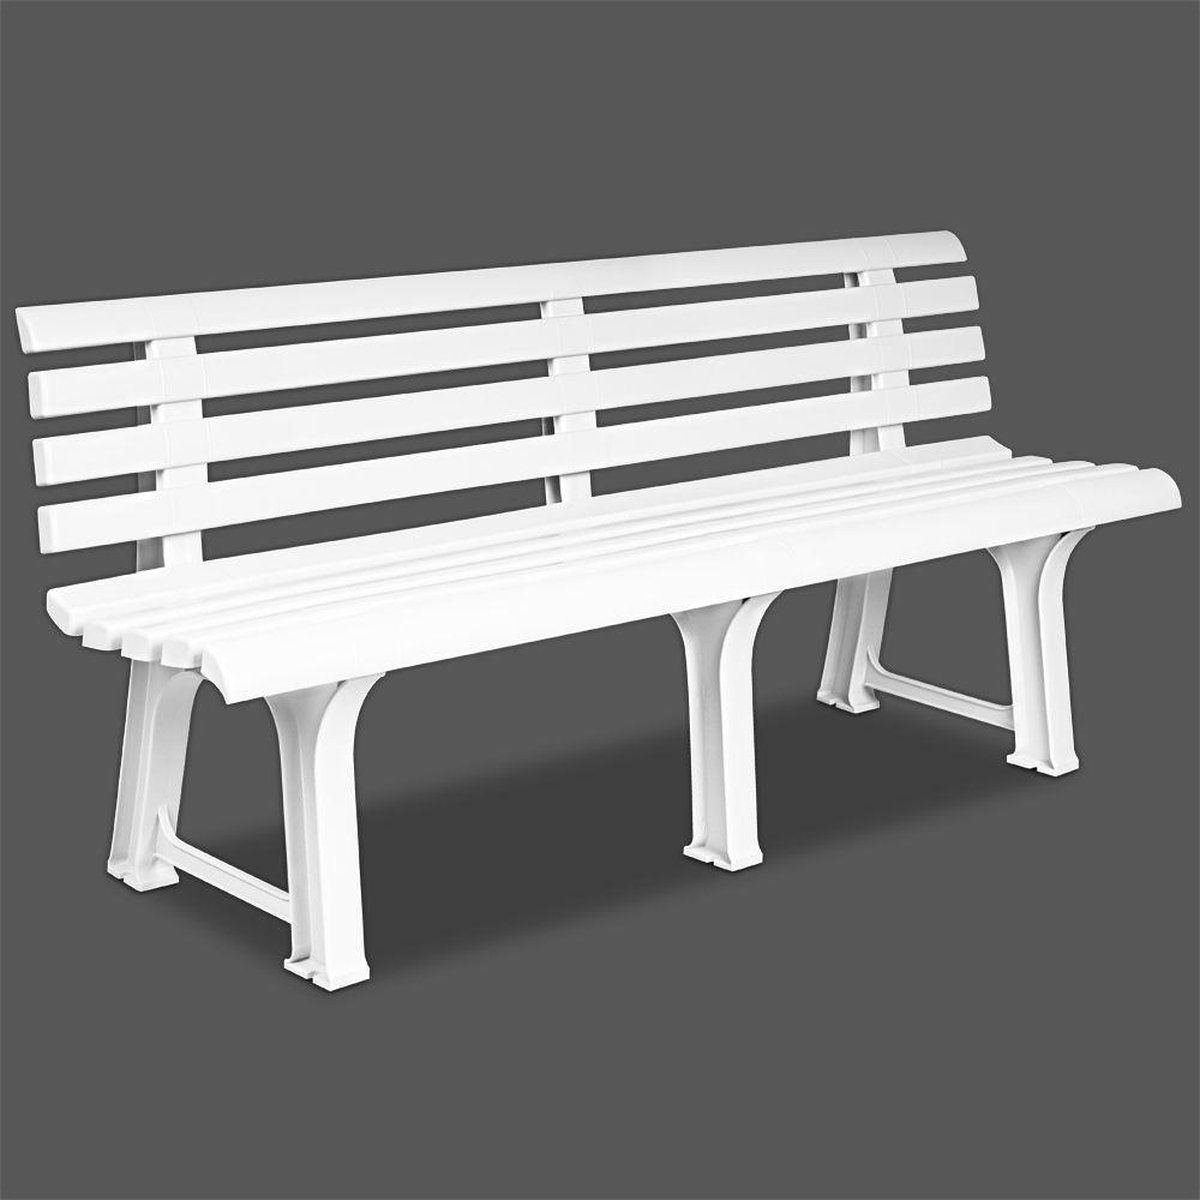 Bench garden seater outdoor furniture patio bench plastic benches